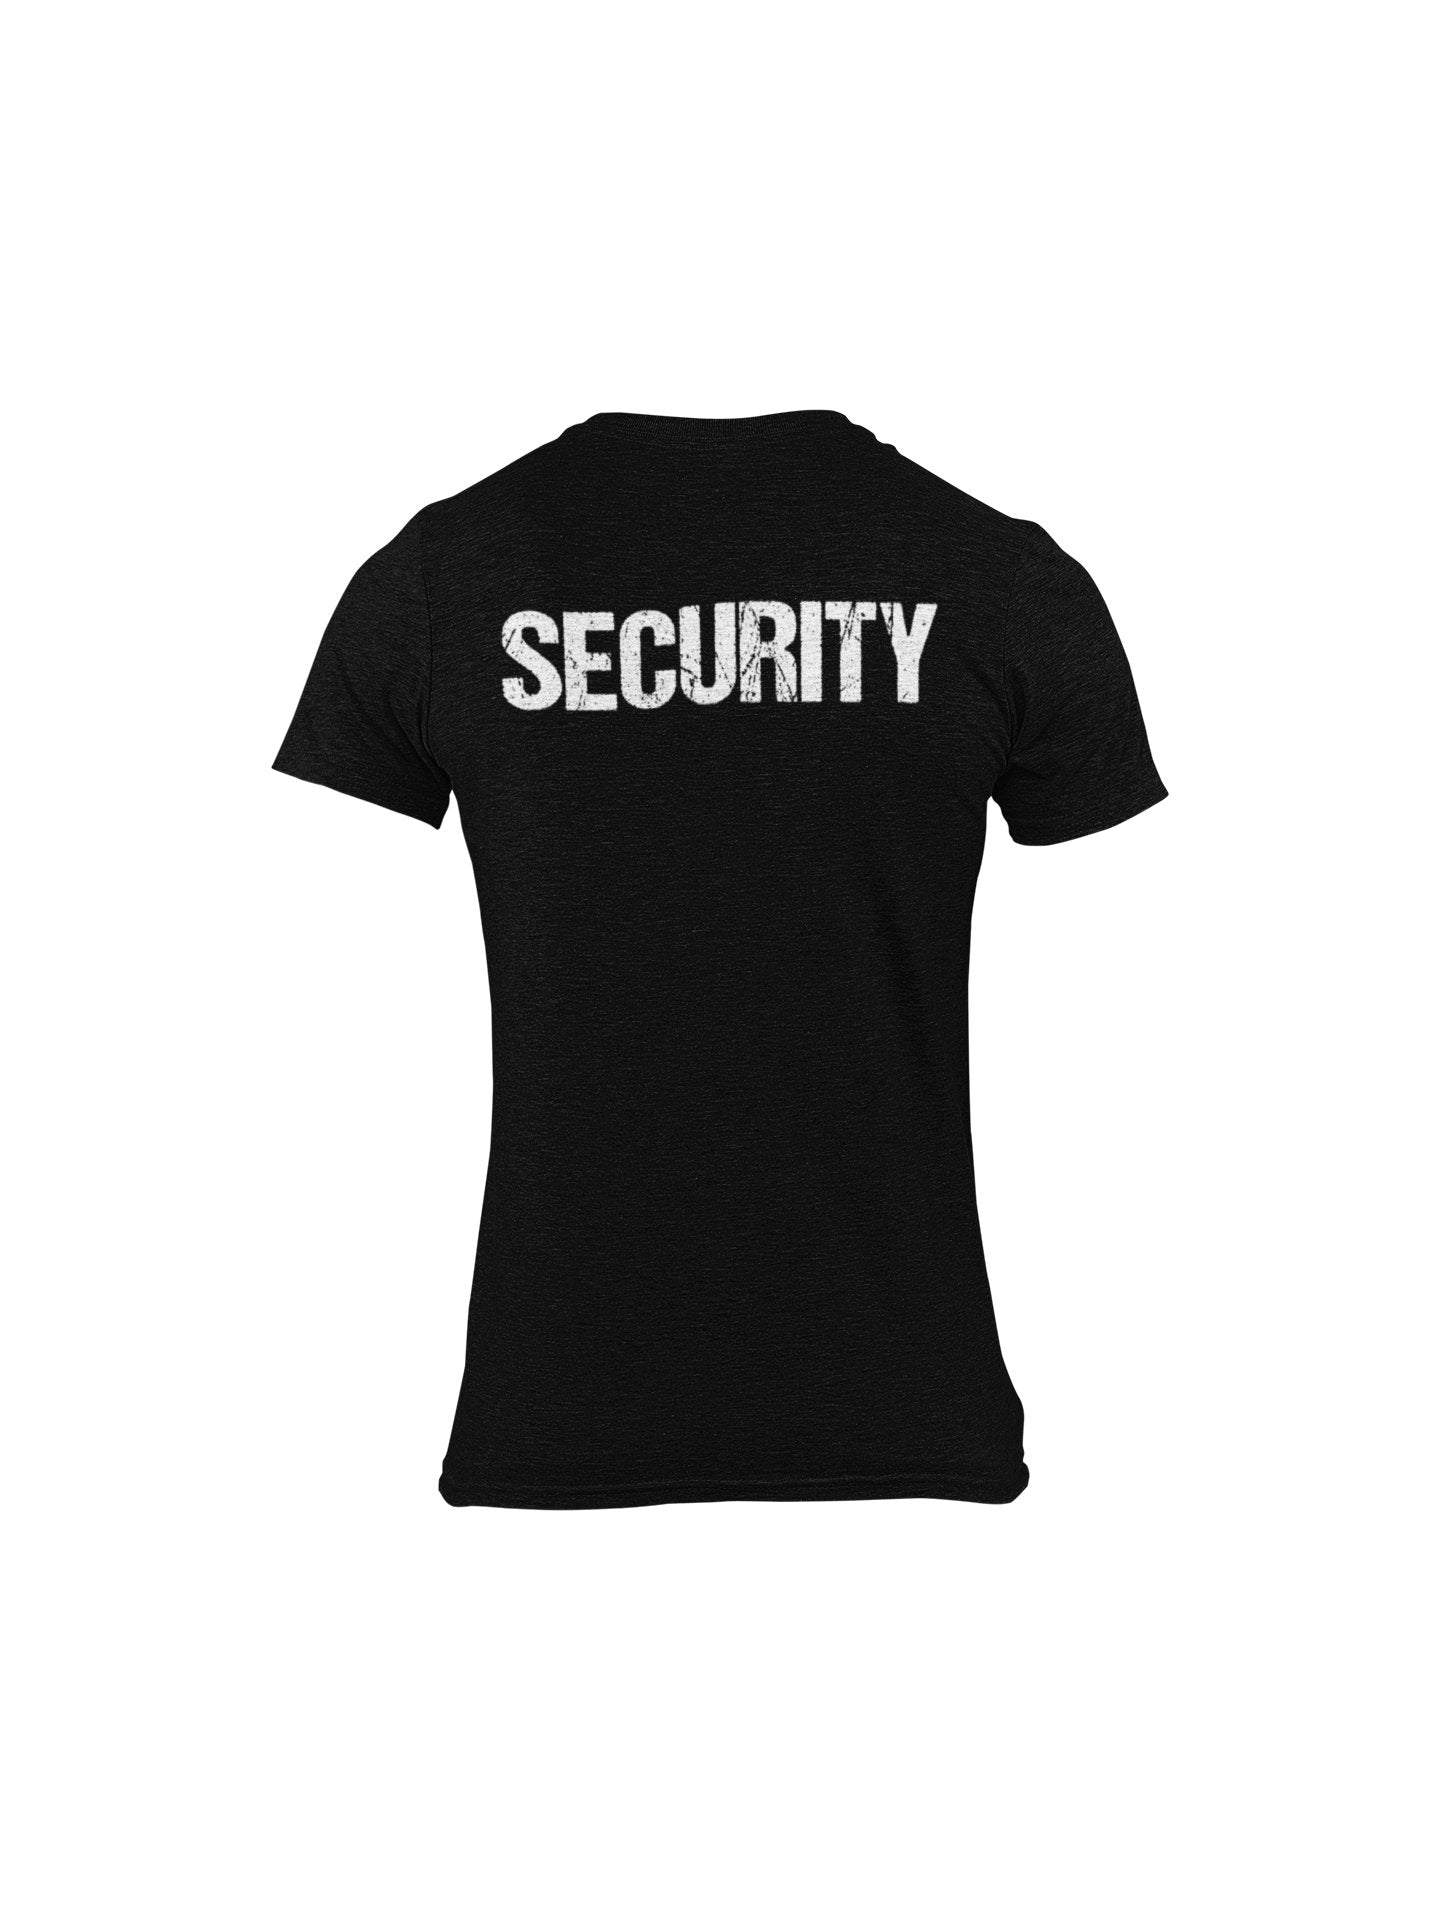 Men's Distressed Security Tee Front & Back Print (Black & White)